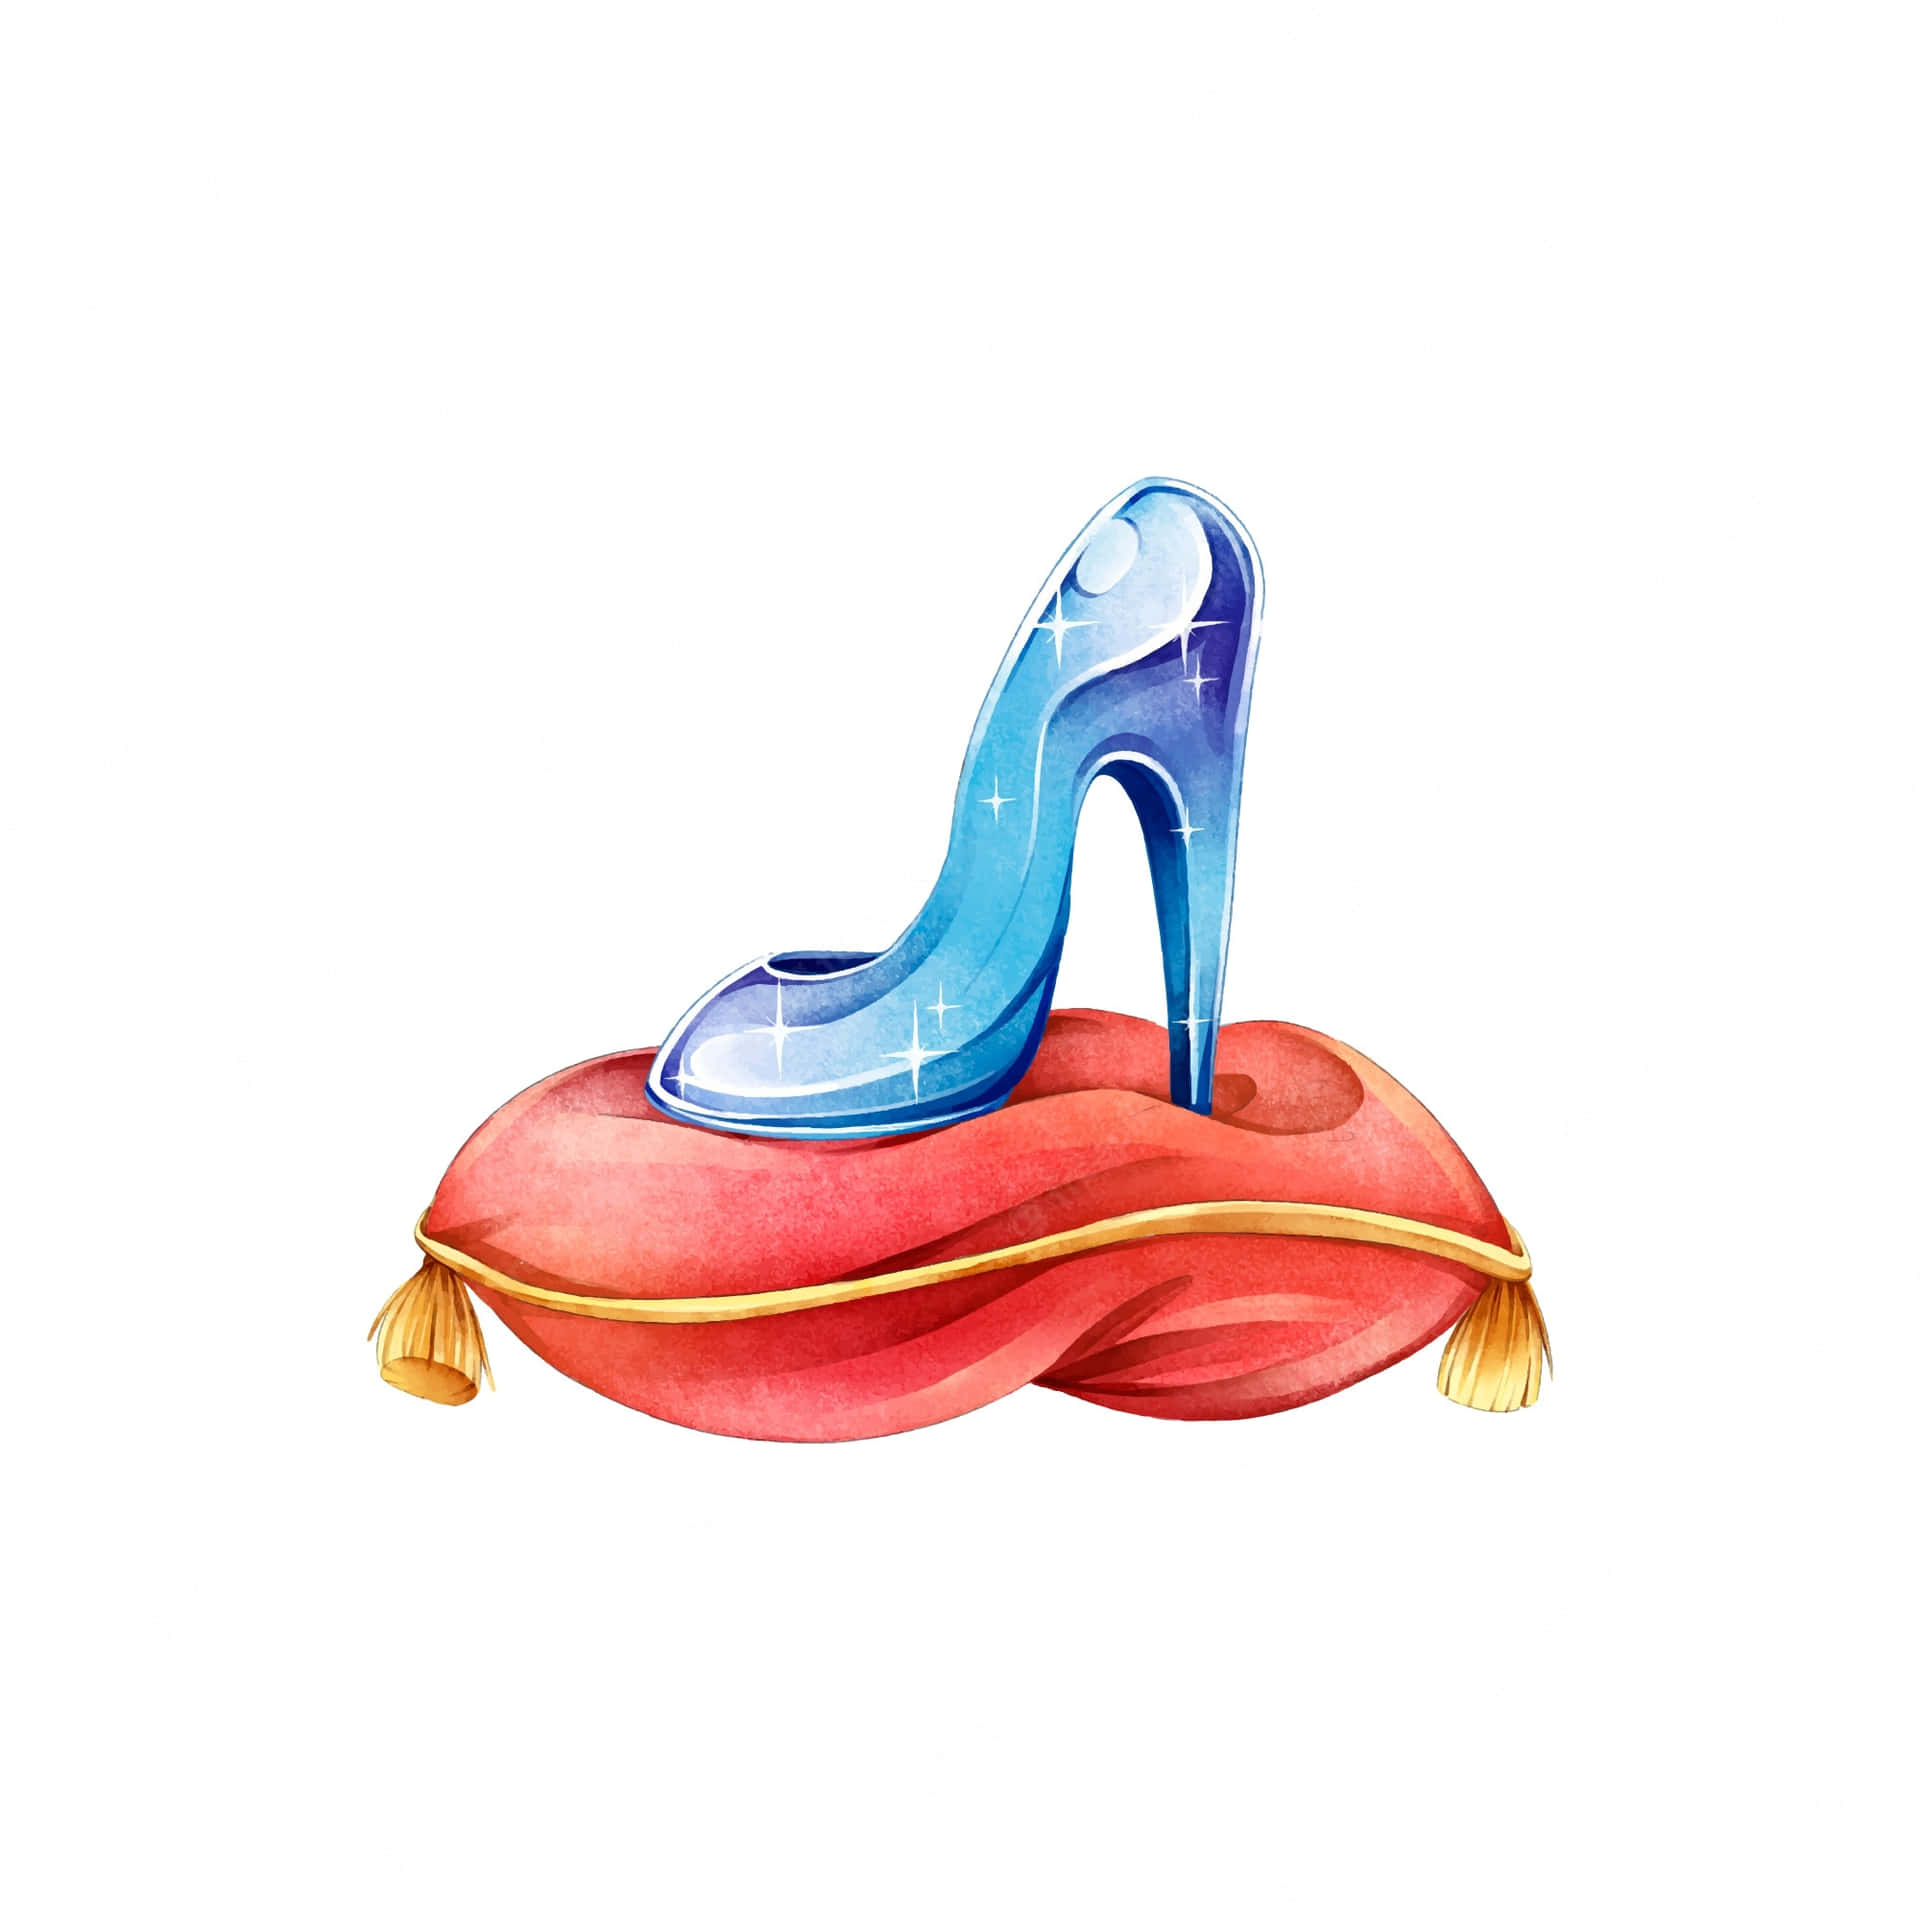 An Illustration of Cinderella in Her Most Iconic Moment